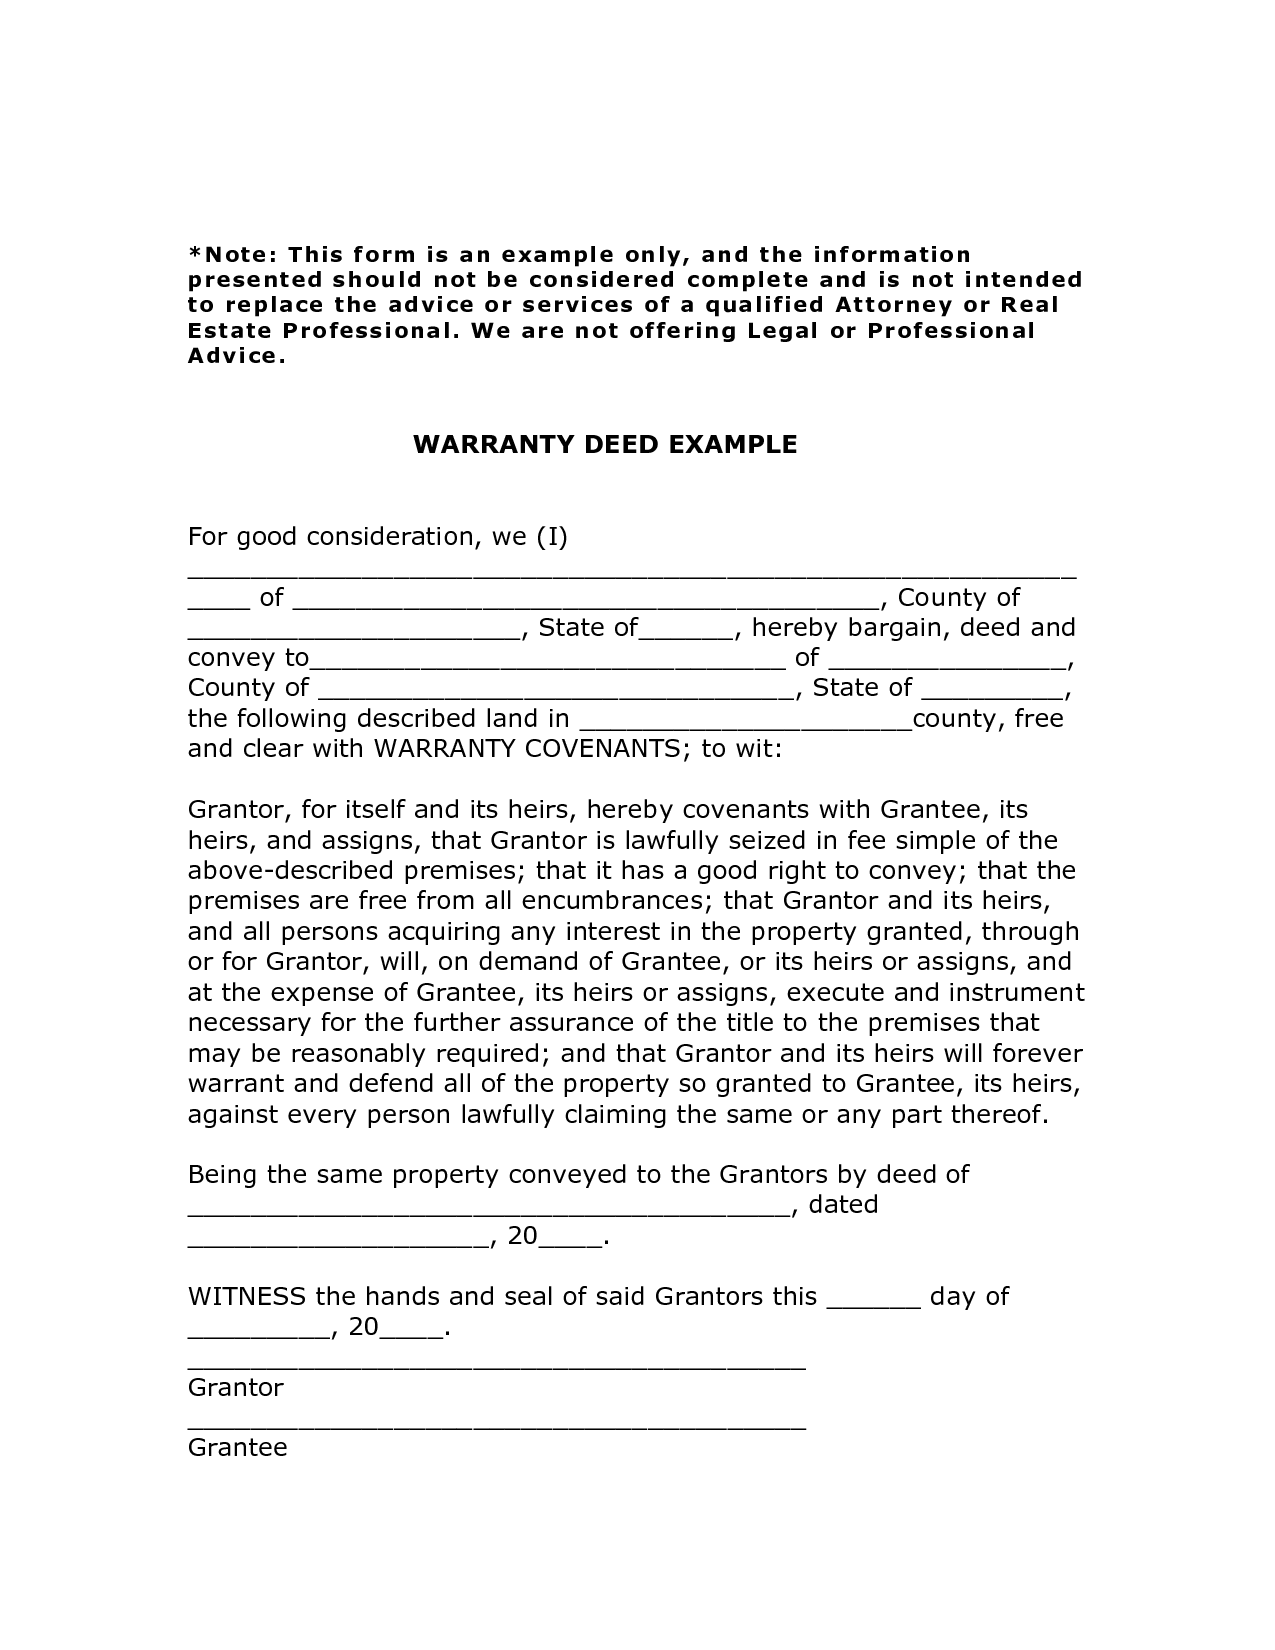 special-warranty-deed-example-free-printable-documents